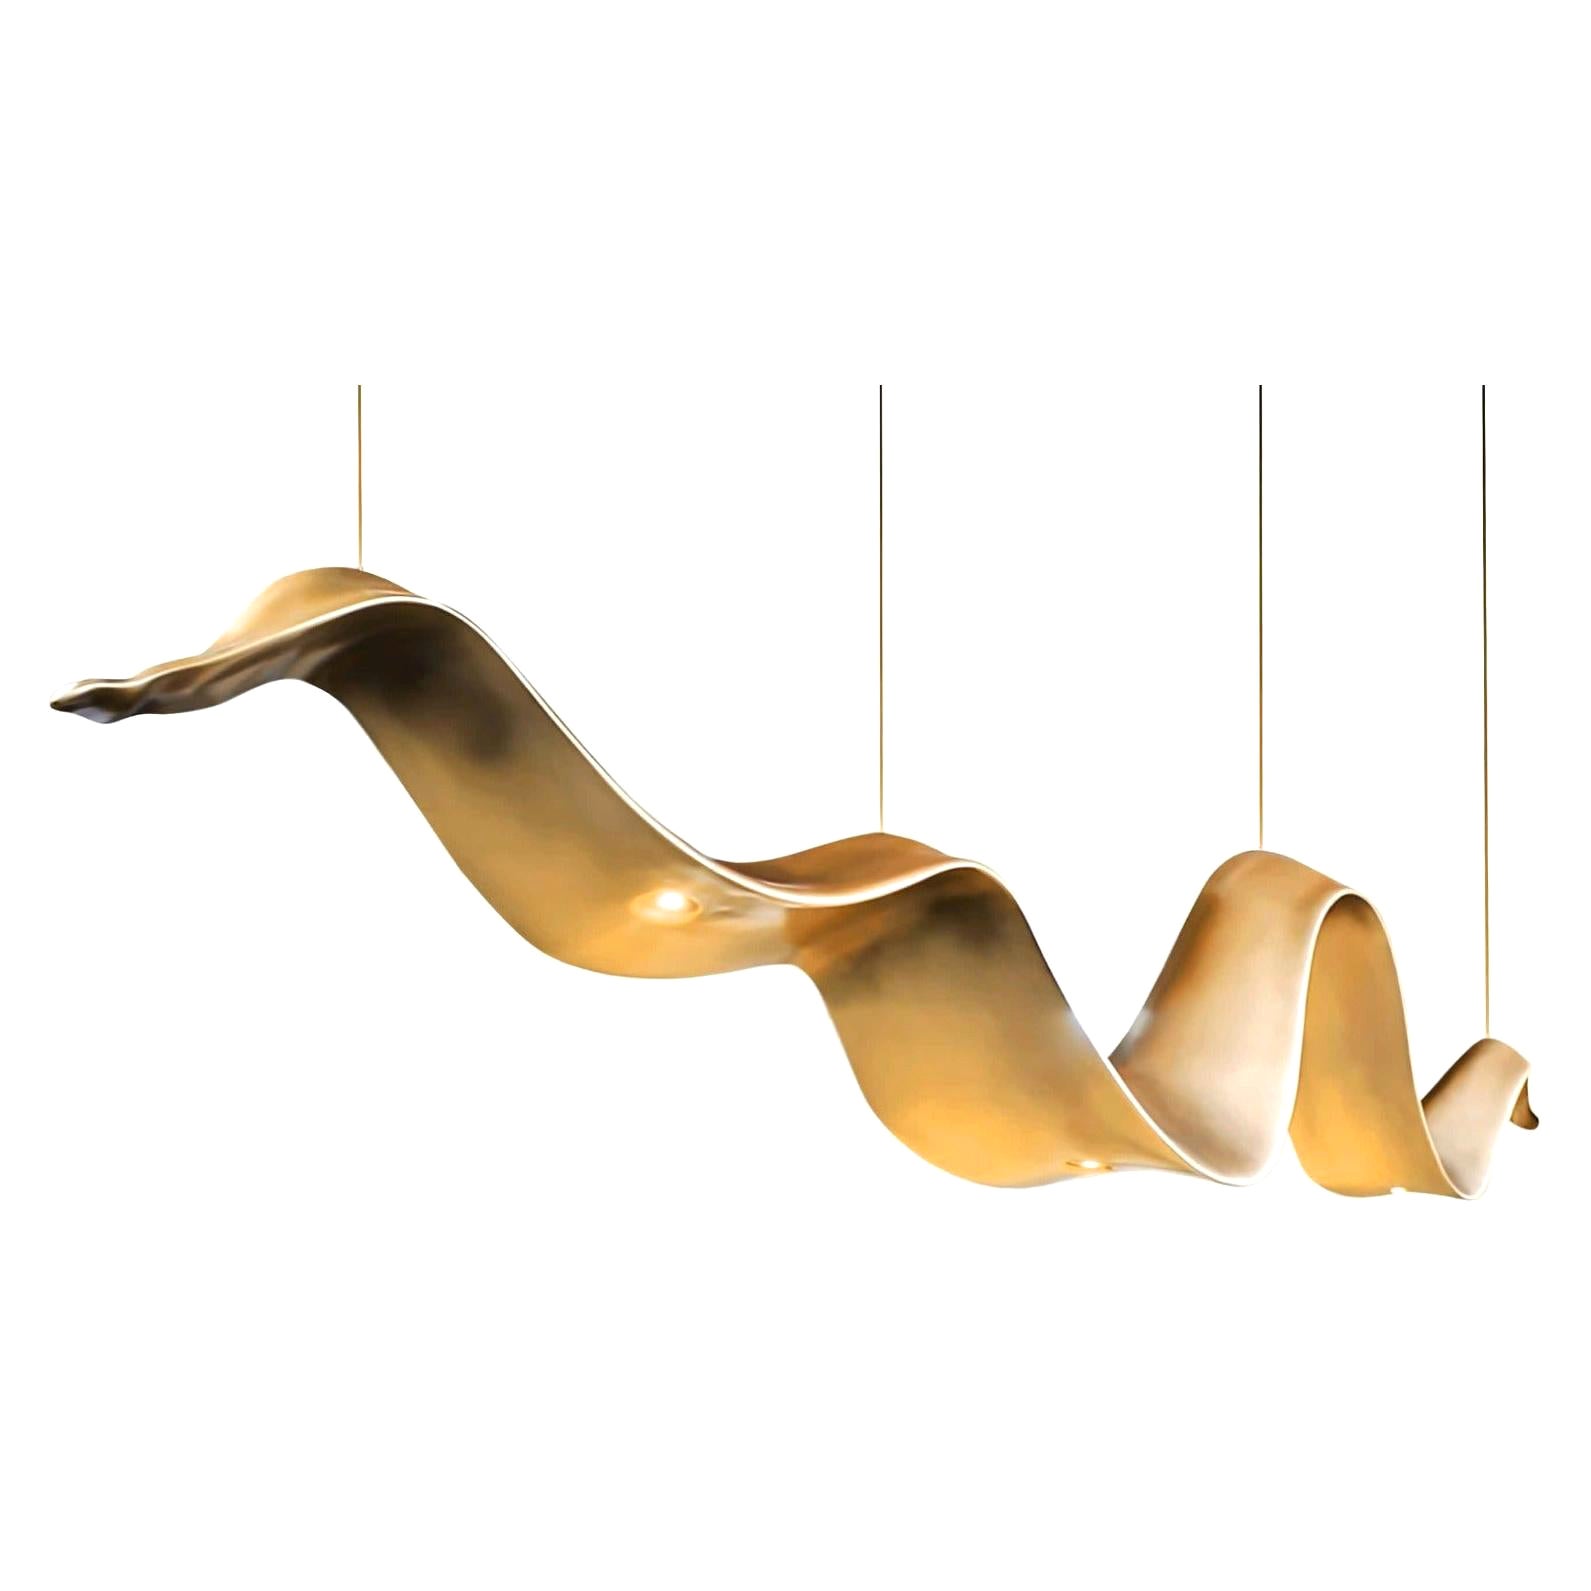 New Suspension Lamp in Resin Finished in Pale Gold Color For Sale